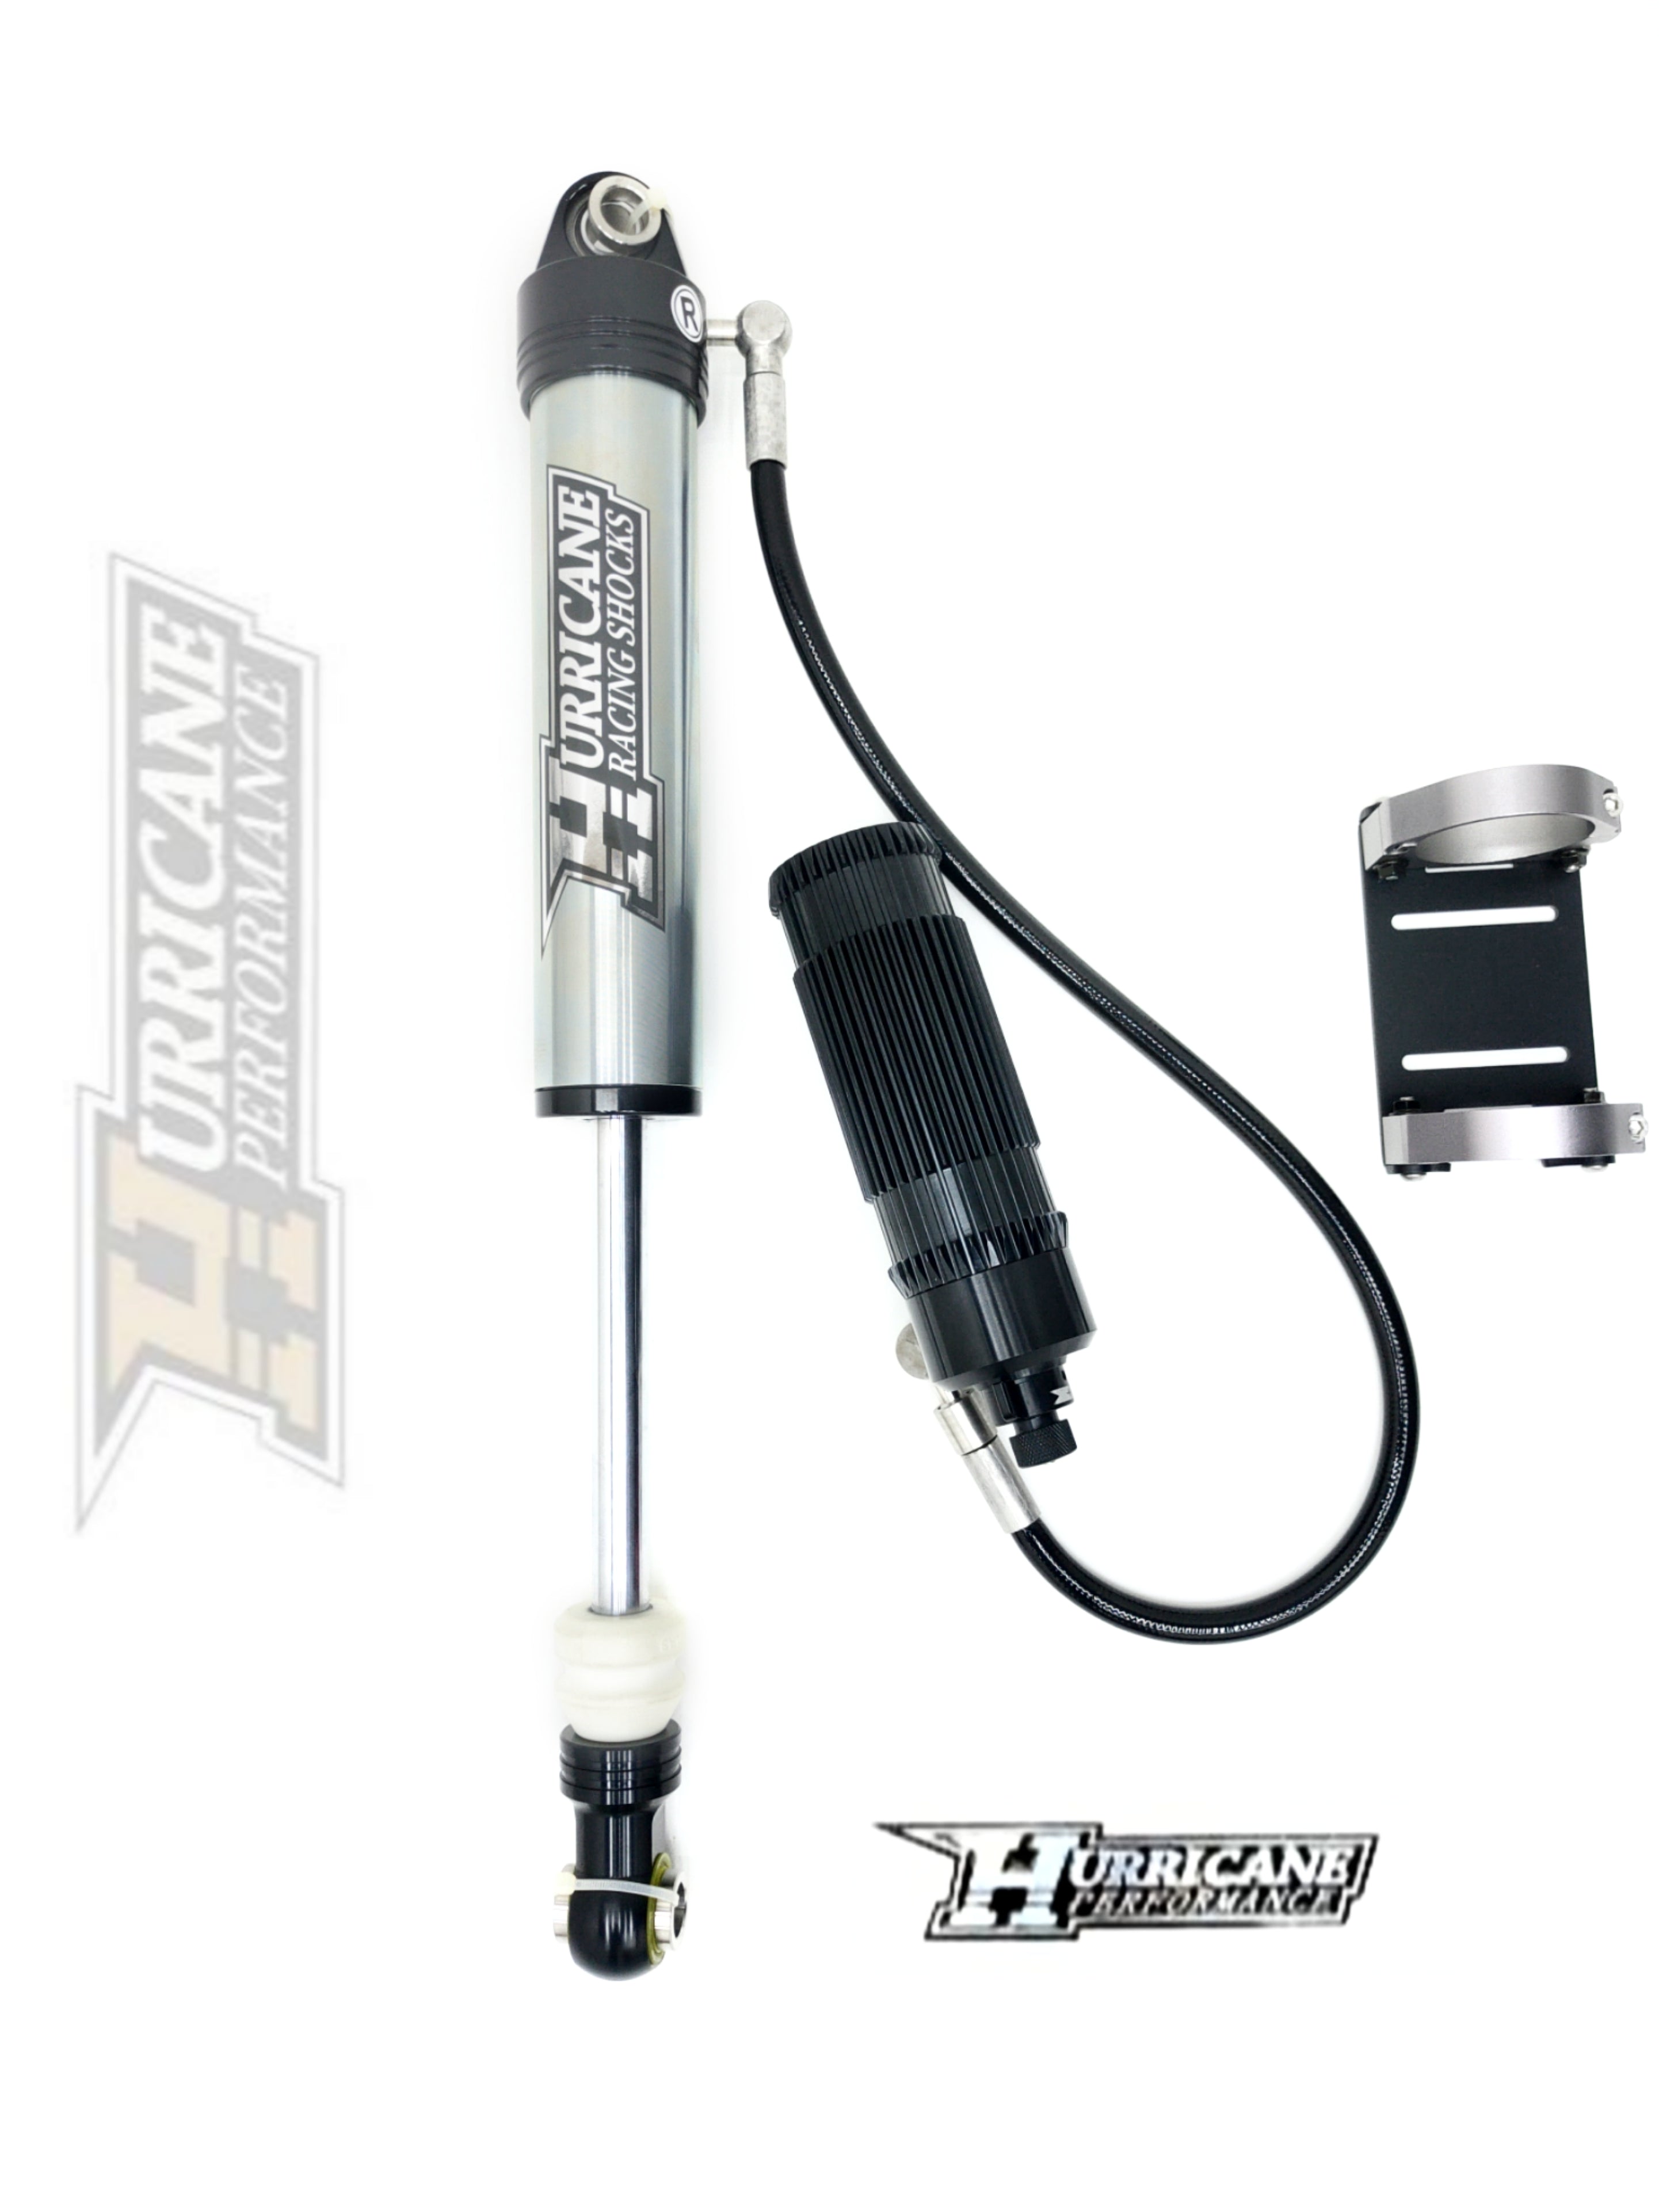 Hurricane Performance Extreme Series Shocks 3" Front & 2.5" Rear, With Reservoir, Double Adjuster, for Nissan Patrol Y61